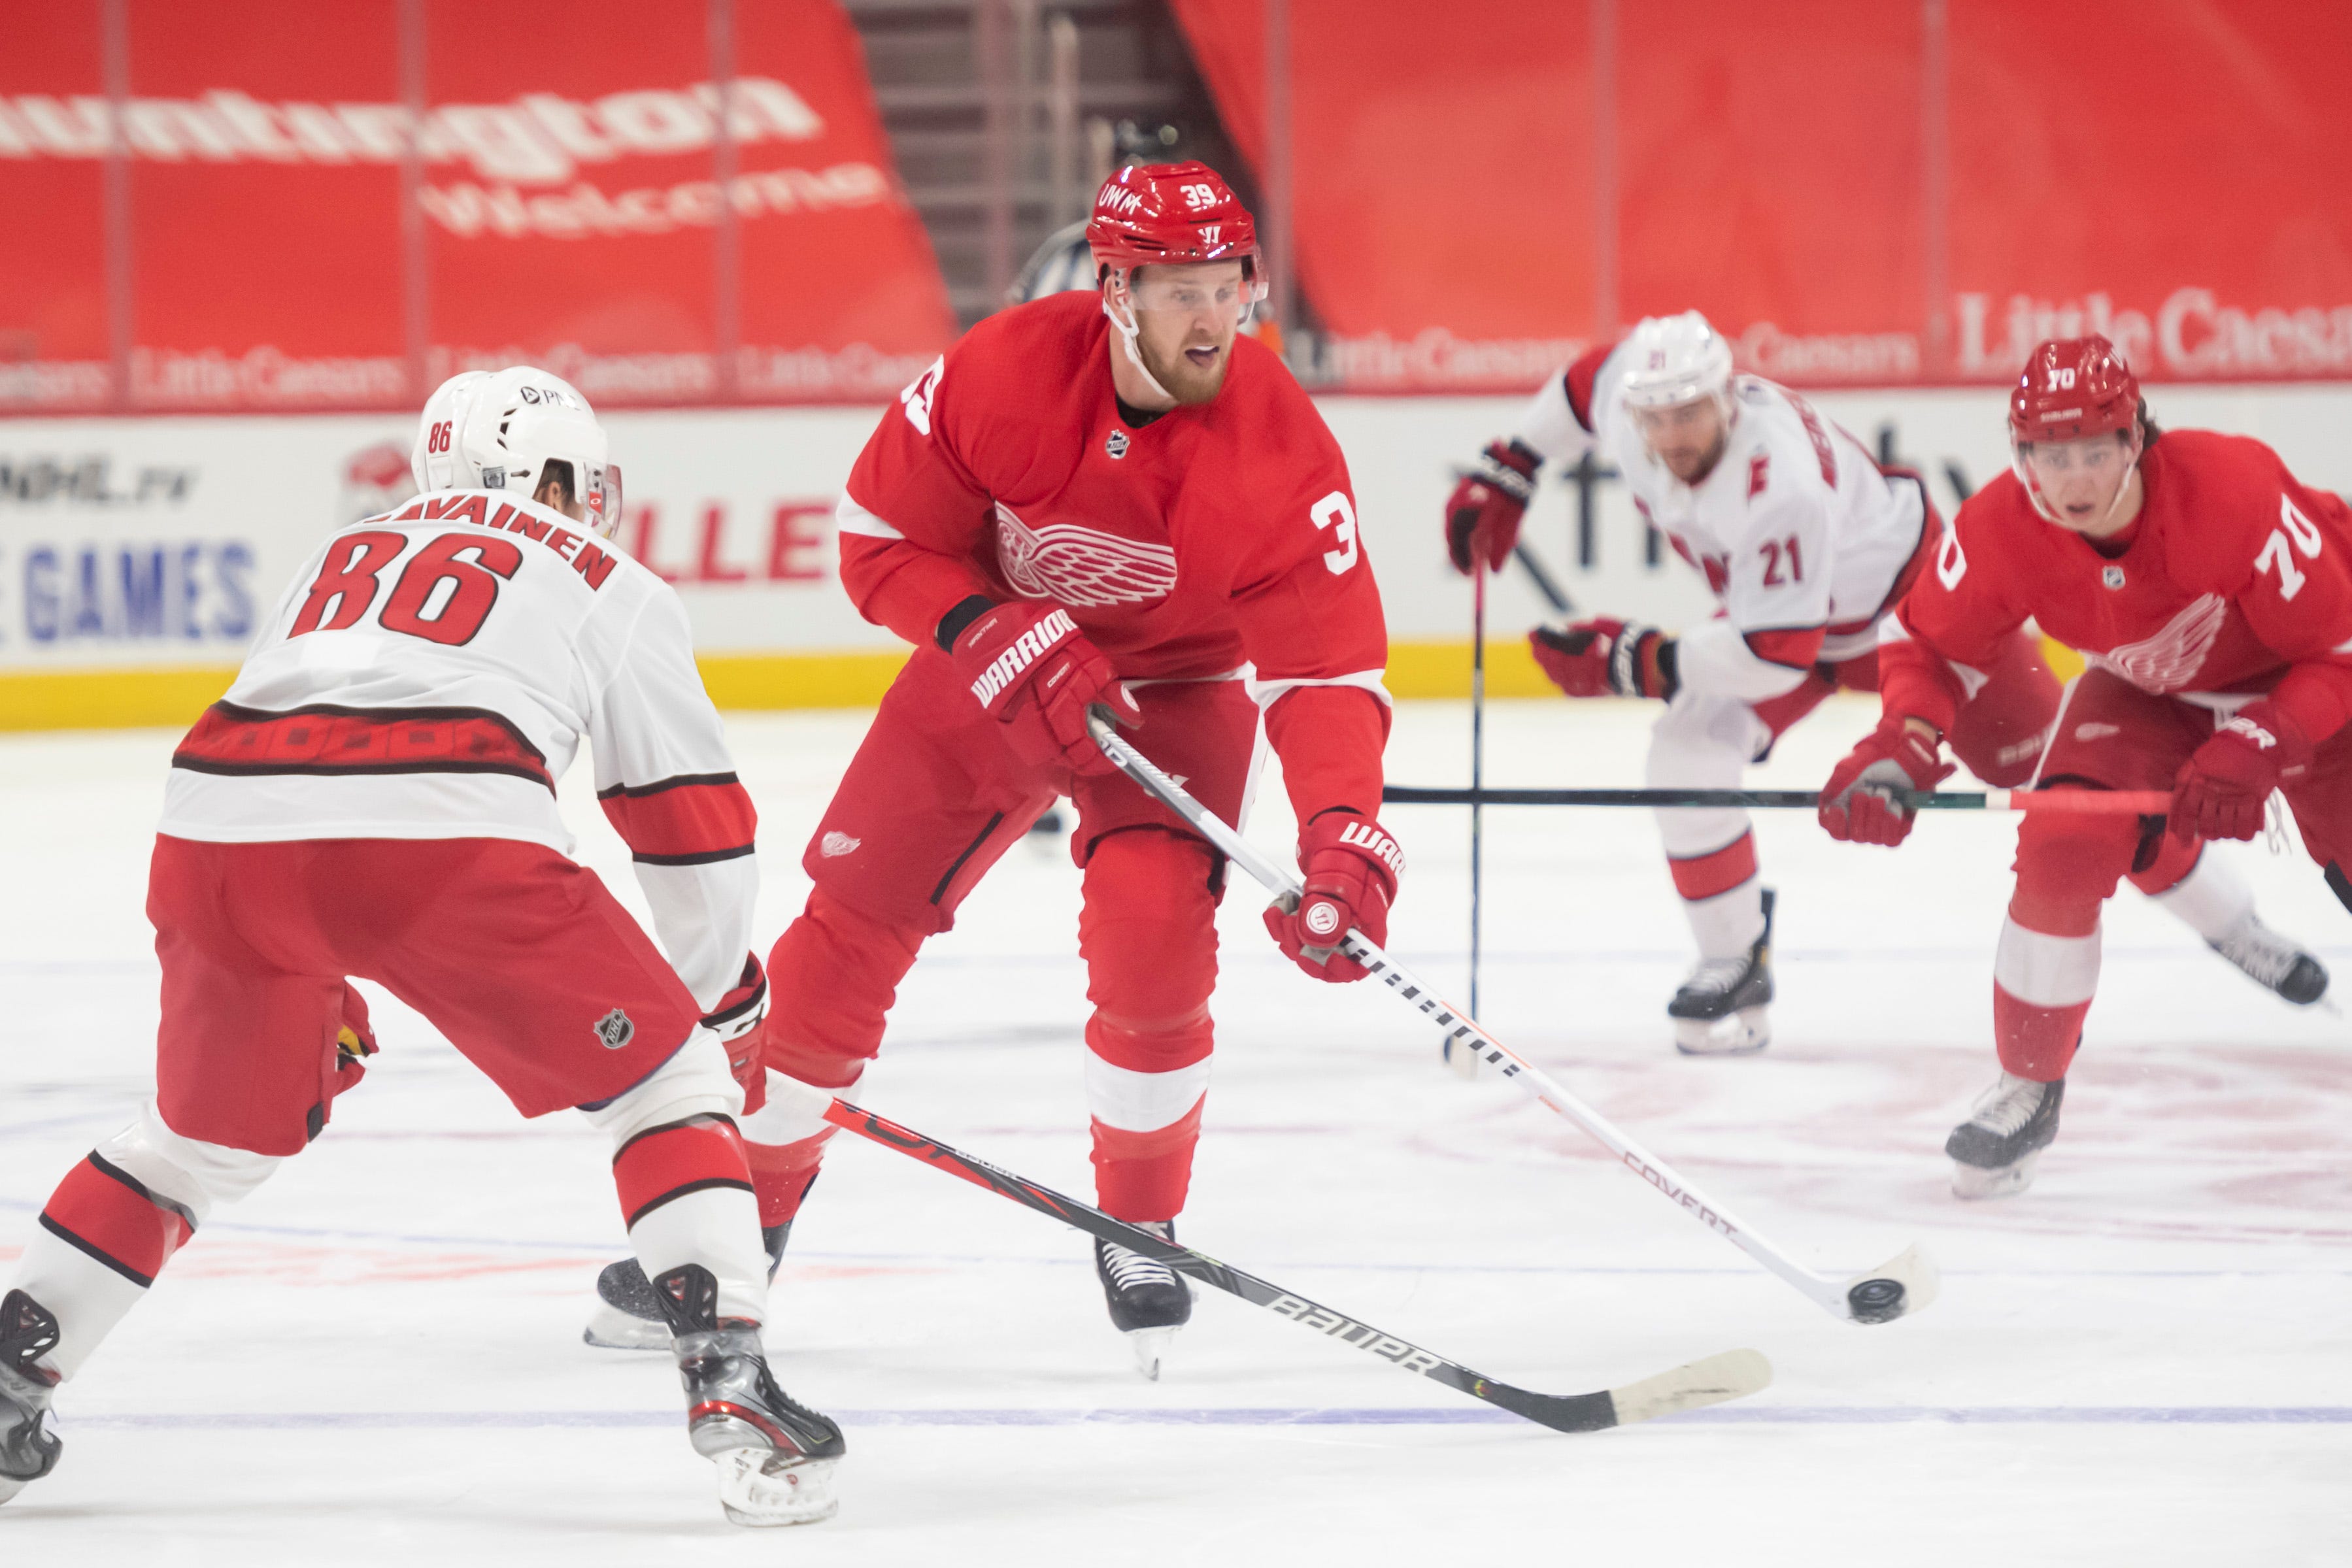 Detroit right wing Anthony Mantha passes the puck in the first period.